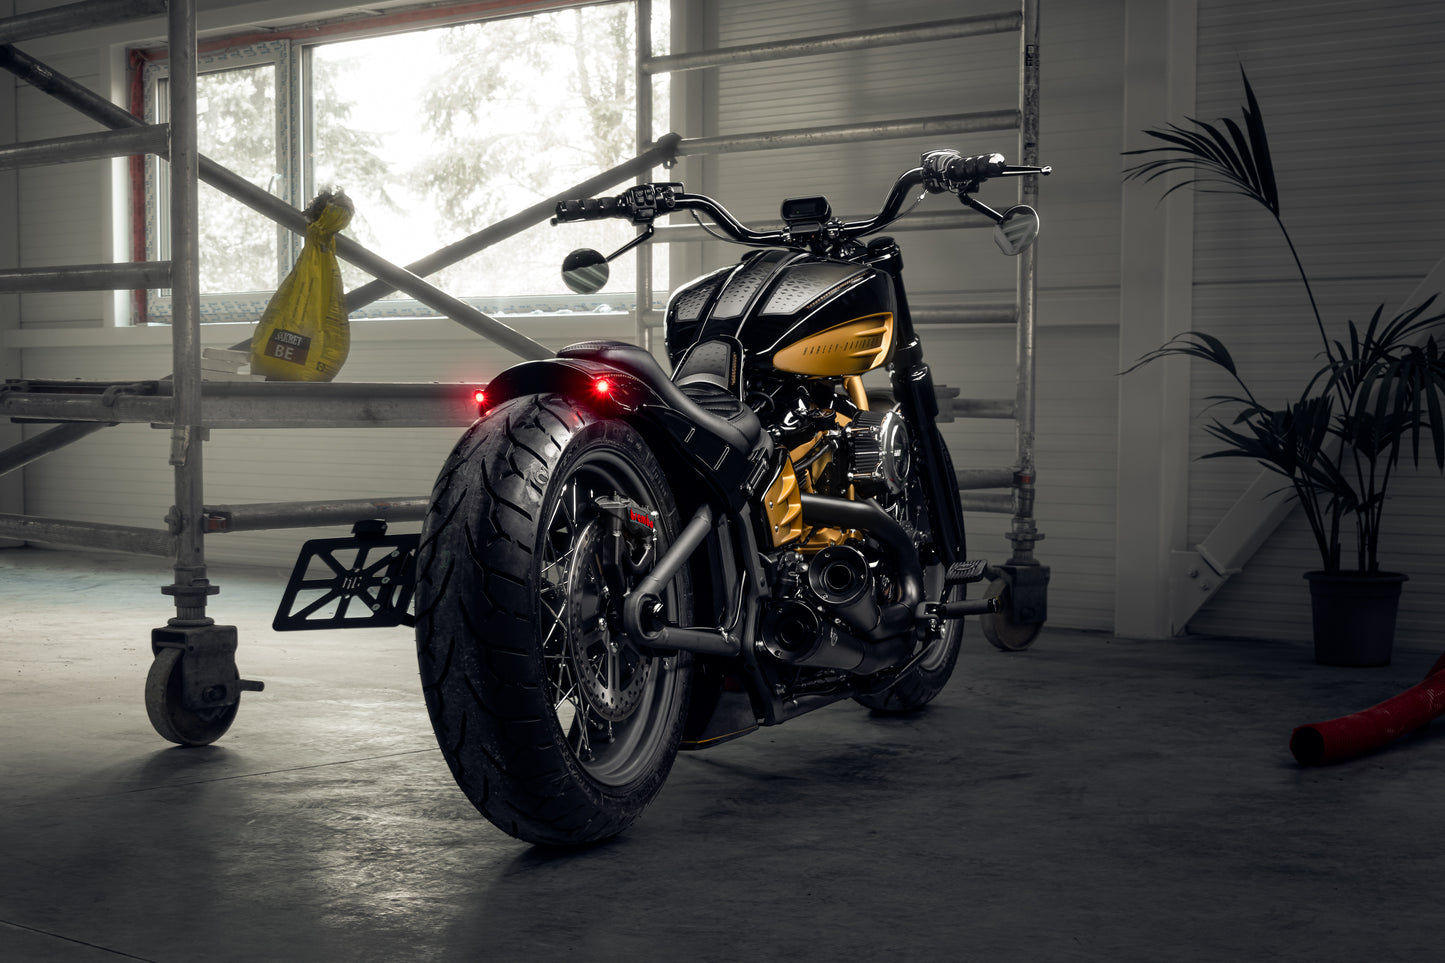 Harley Davidson motorcycle with Killer Custom "Rodstr" rear fender from the rear in a modern garage  with equipment in the background